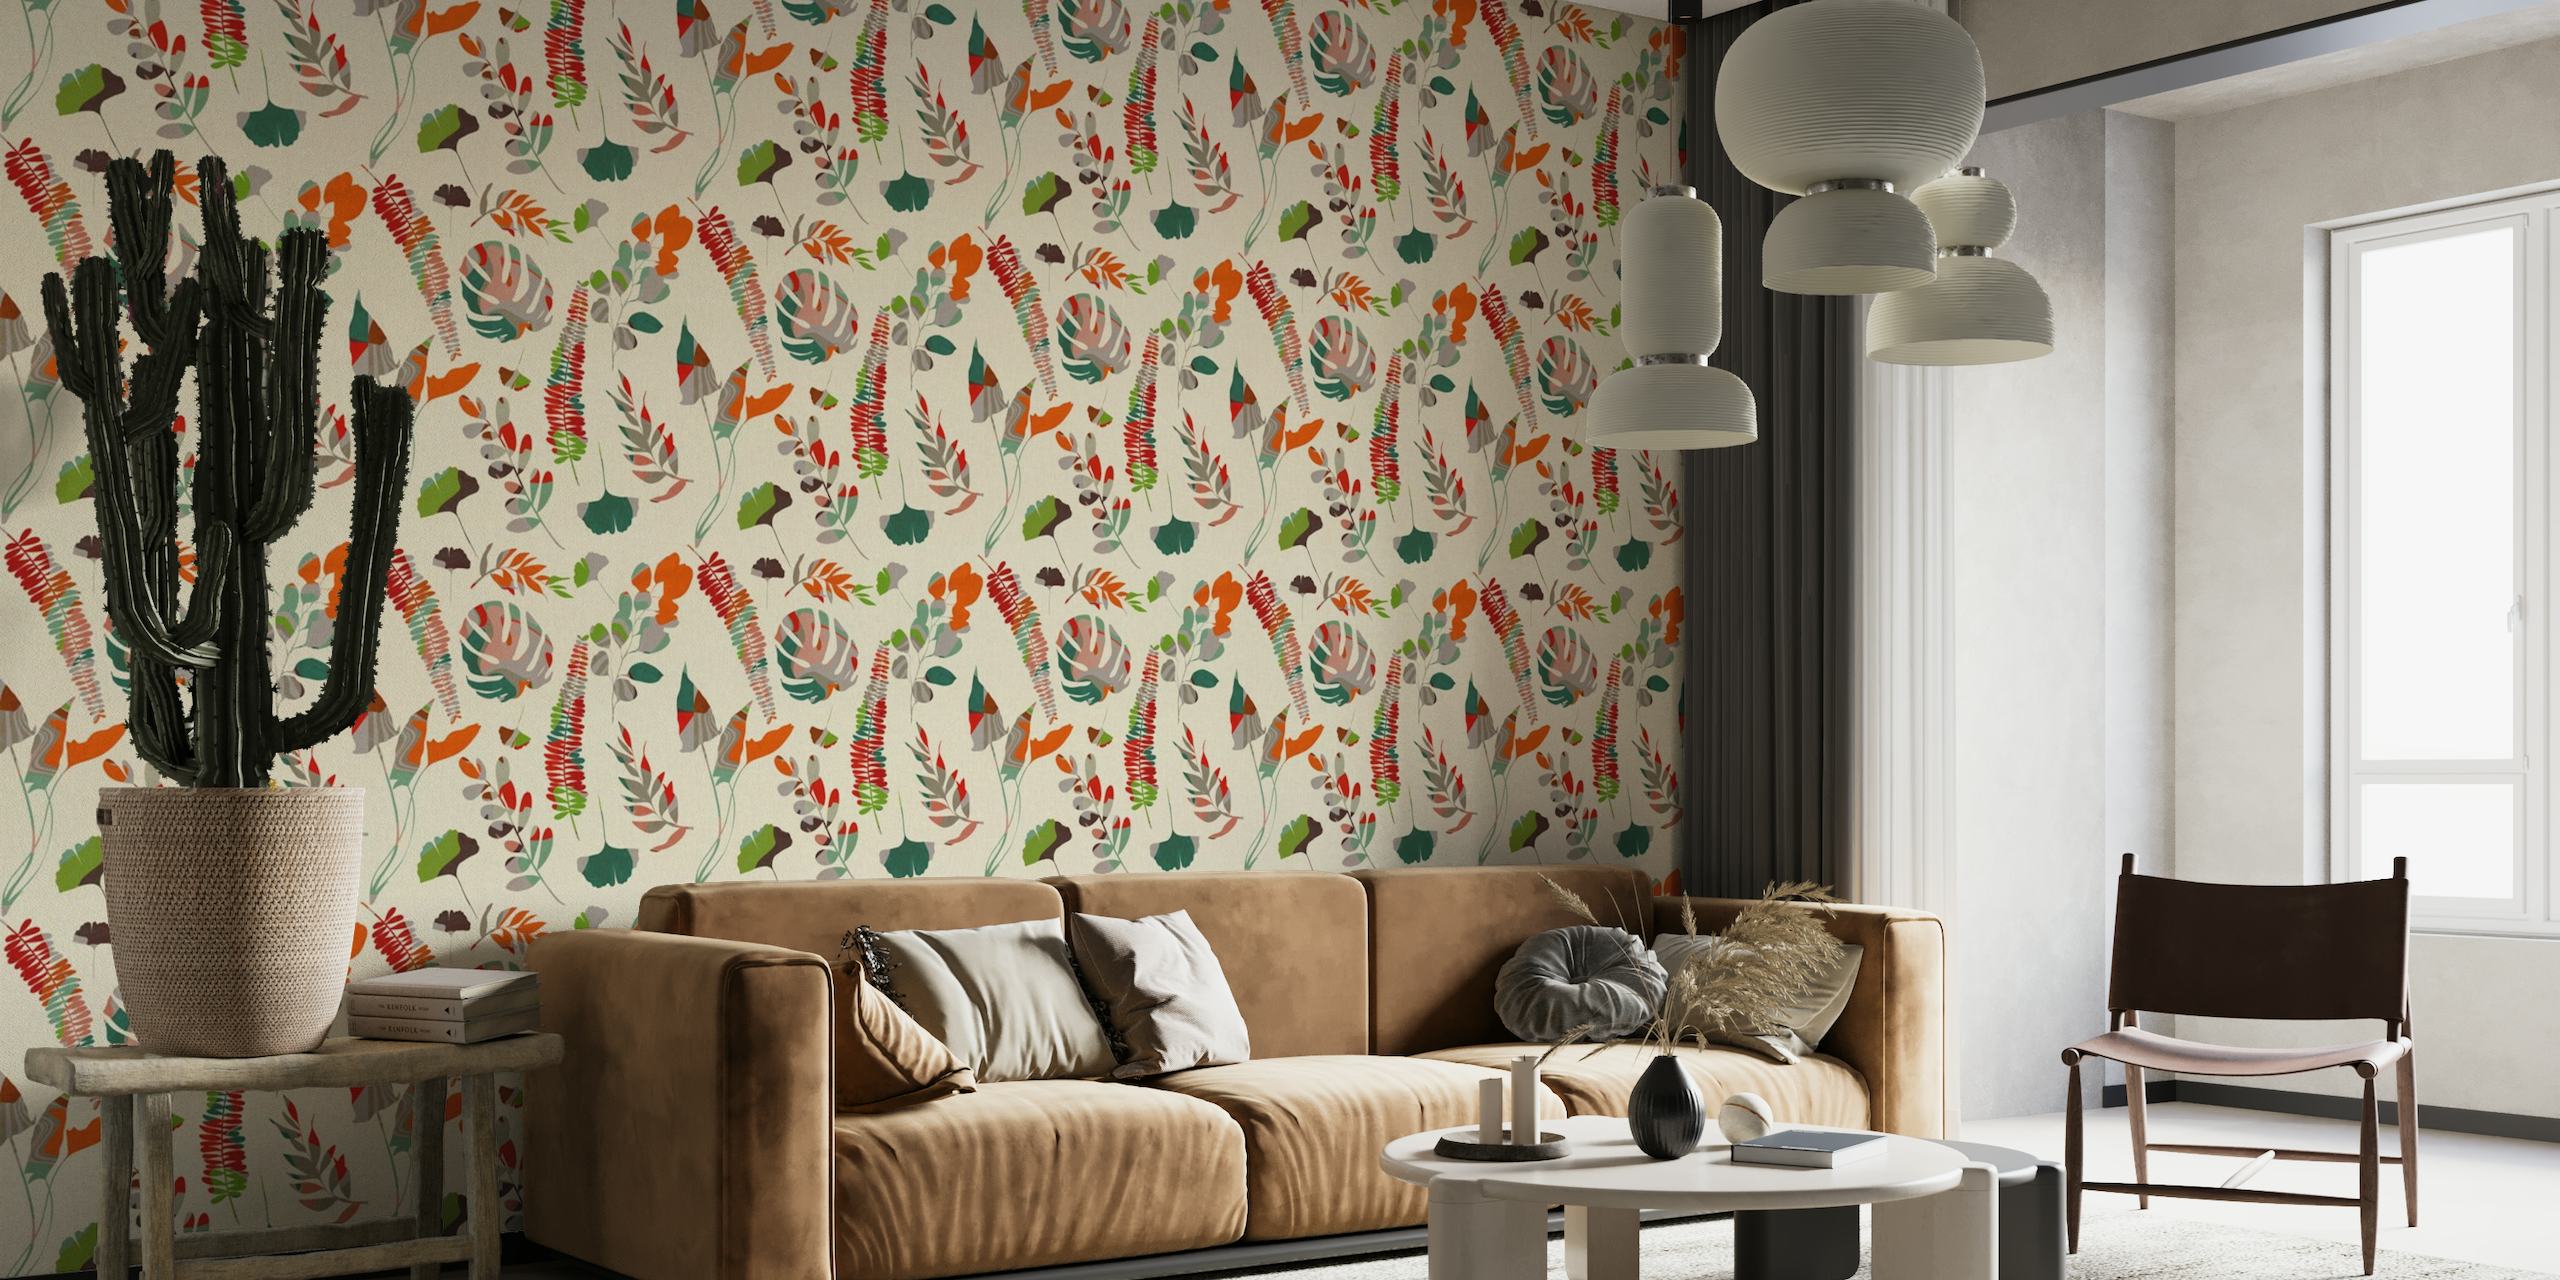 Jungle leaves pattern with red wallpaper